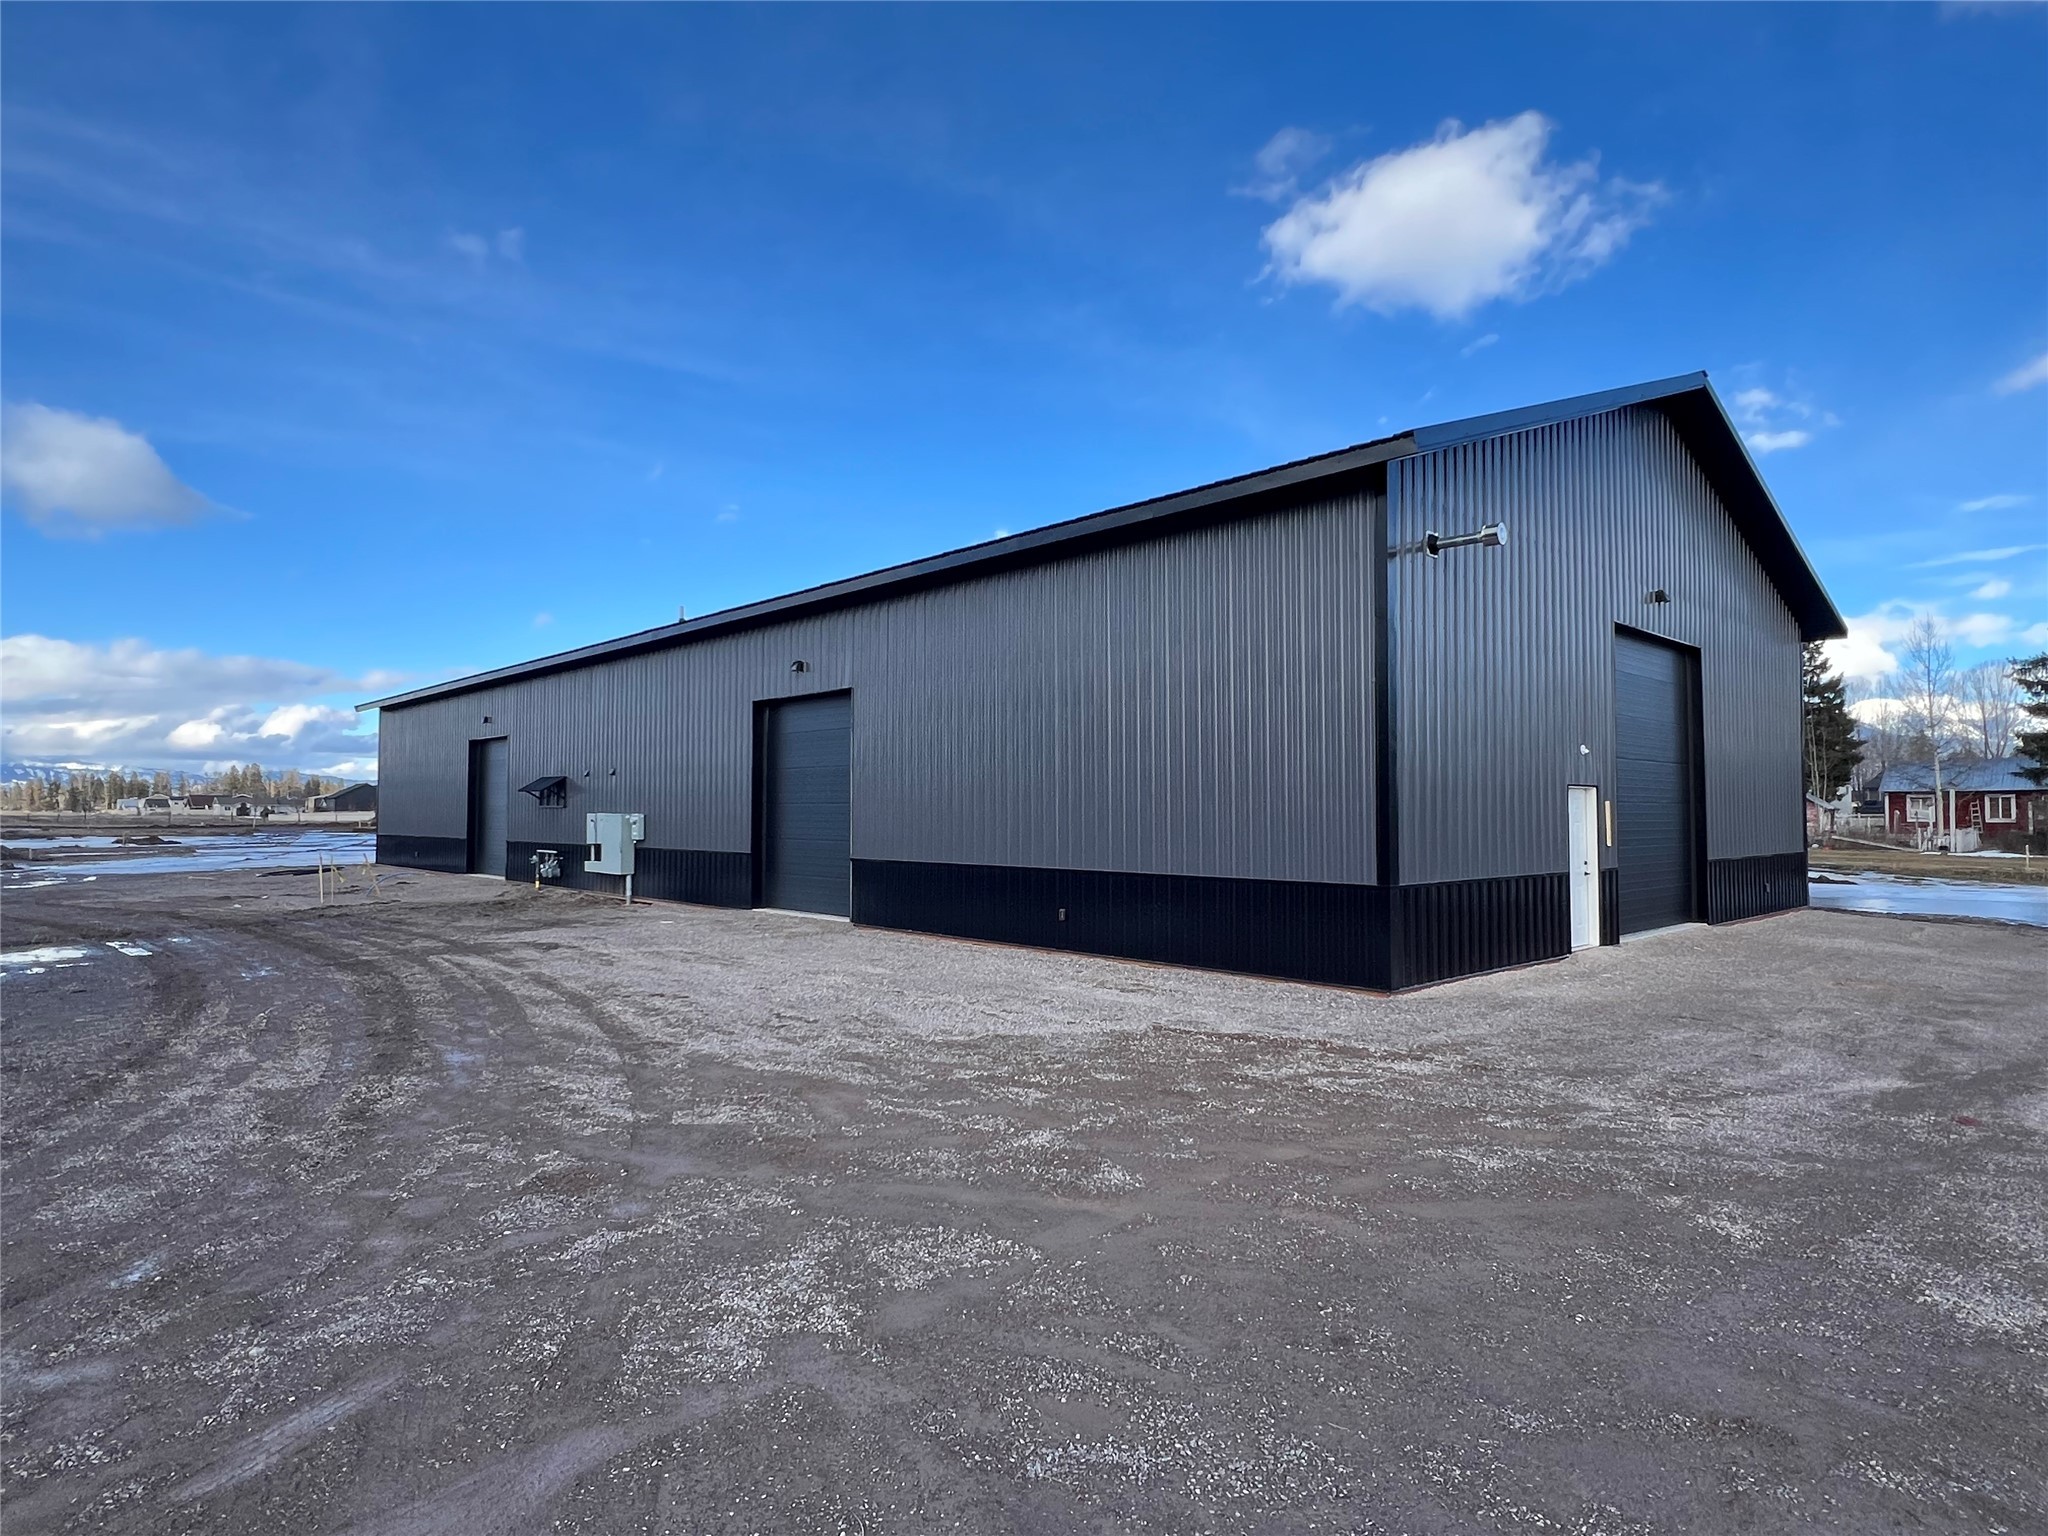 6000 Square Foot (50x120) shop/warehouse space available for lease.  This new development, with access off of Highway 2E and E Reserve, has 6000 SF buildings available as a whole or half building.  375 is a complete building with 2 bathrooms, four man doors, and four overhead doors (2@12x14 and 2@10x12).  The building has metal walls and ceiling interior finishes, 16' walls, gas heater, evergreen water, private sewer, and 400 Amp service.  The development is paved, and set up for tractor trailer circulation and deliveries.  Call Zac Andrews at 406-250-6160, or your Real Estate Professional.